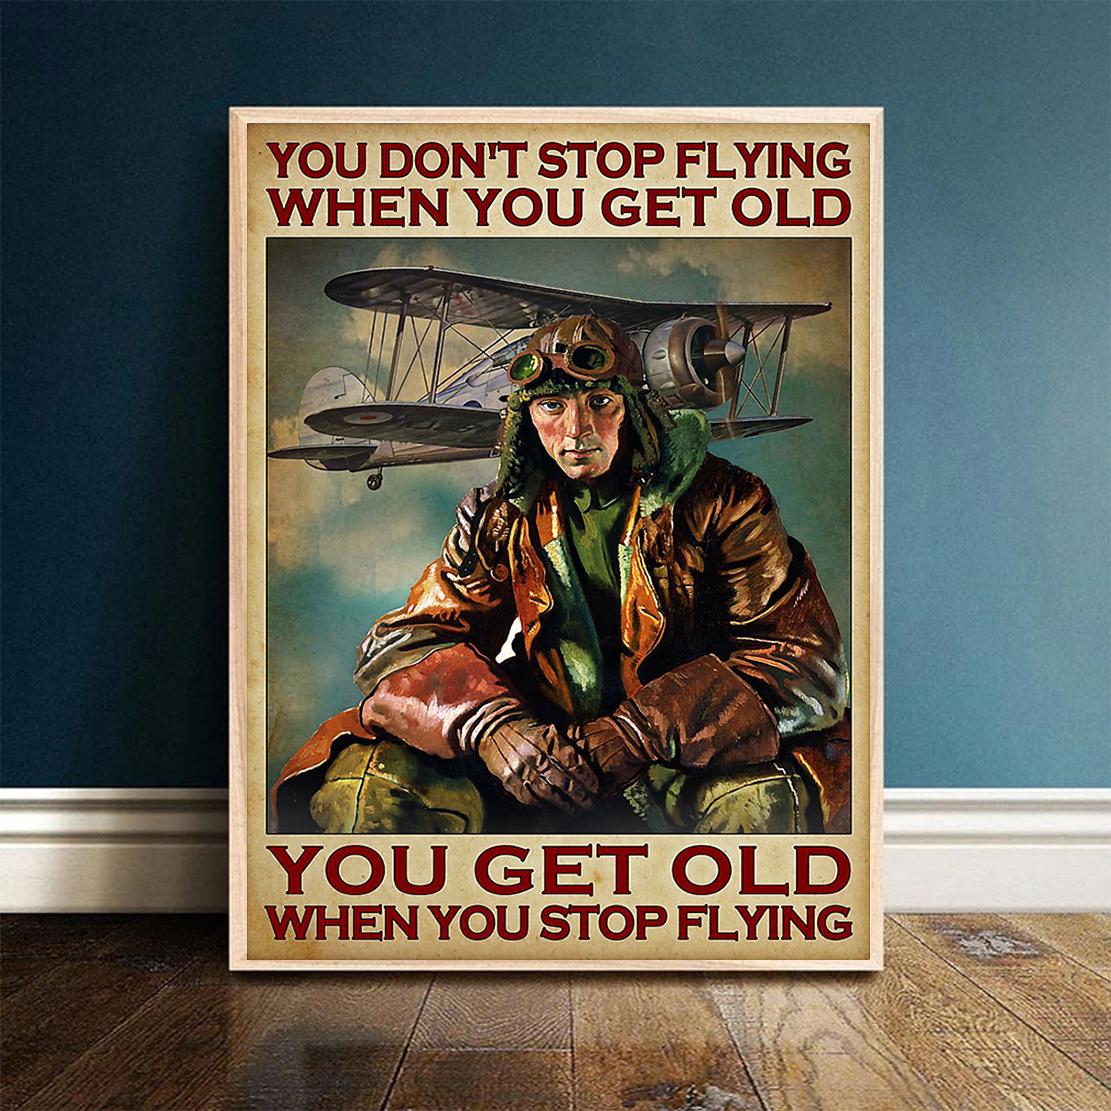 Pilot you don't stop flying when you get old poster